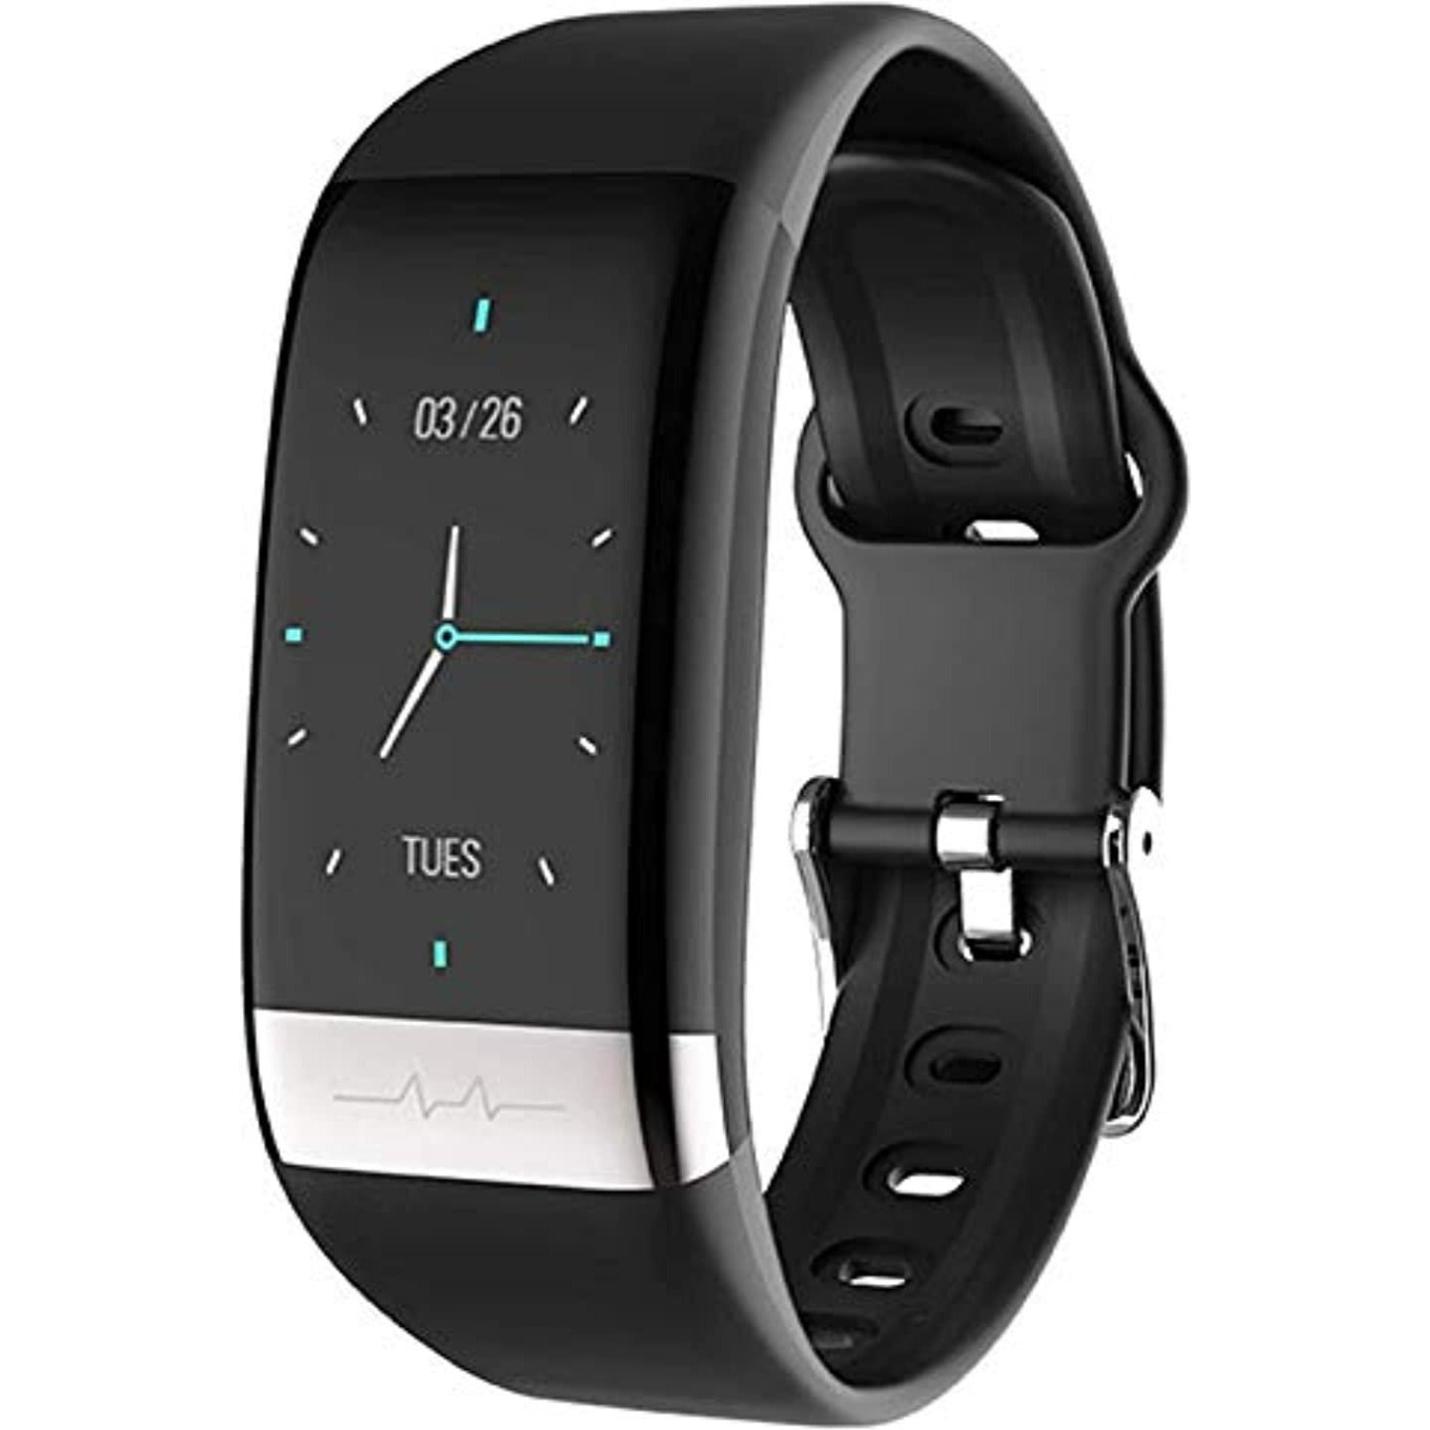 Waterproof Fitness Tracker - Sleep Monitor - All-Day Step Counter - Smart Band